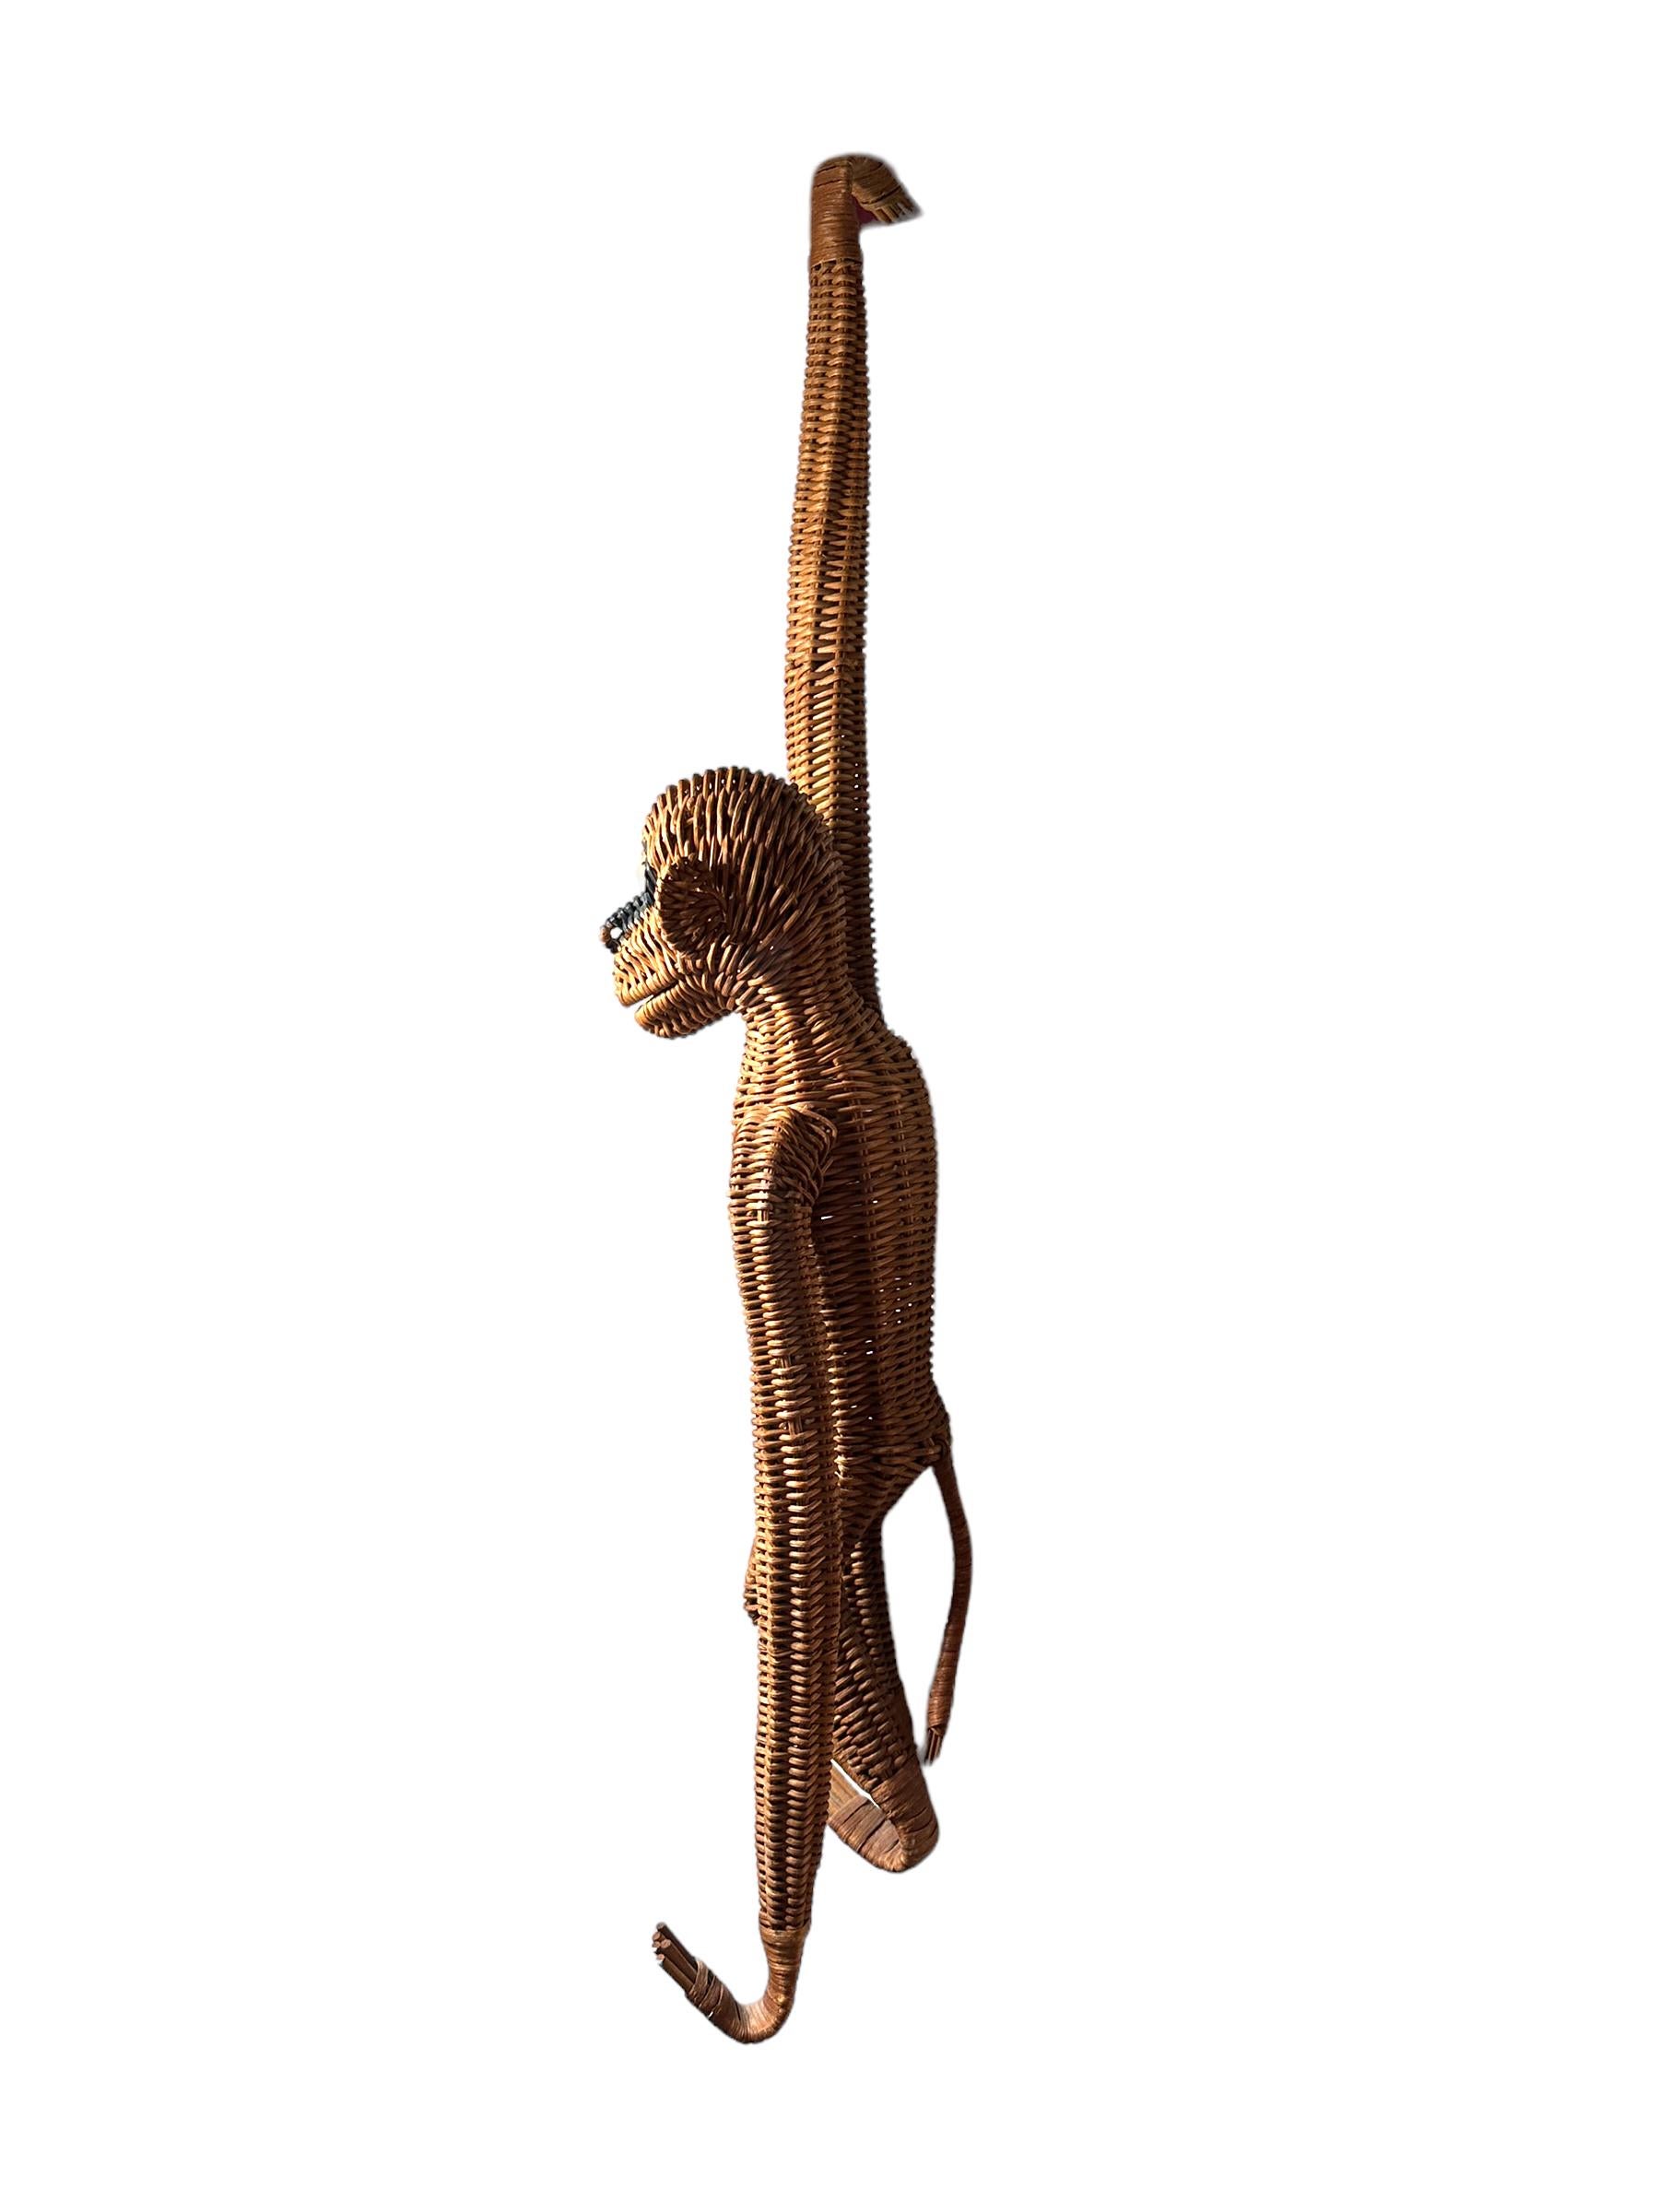 French Mid-Century Modern Monkey Ape Rattan Wicker Hanging Figure 1970s, France For Sale